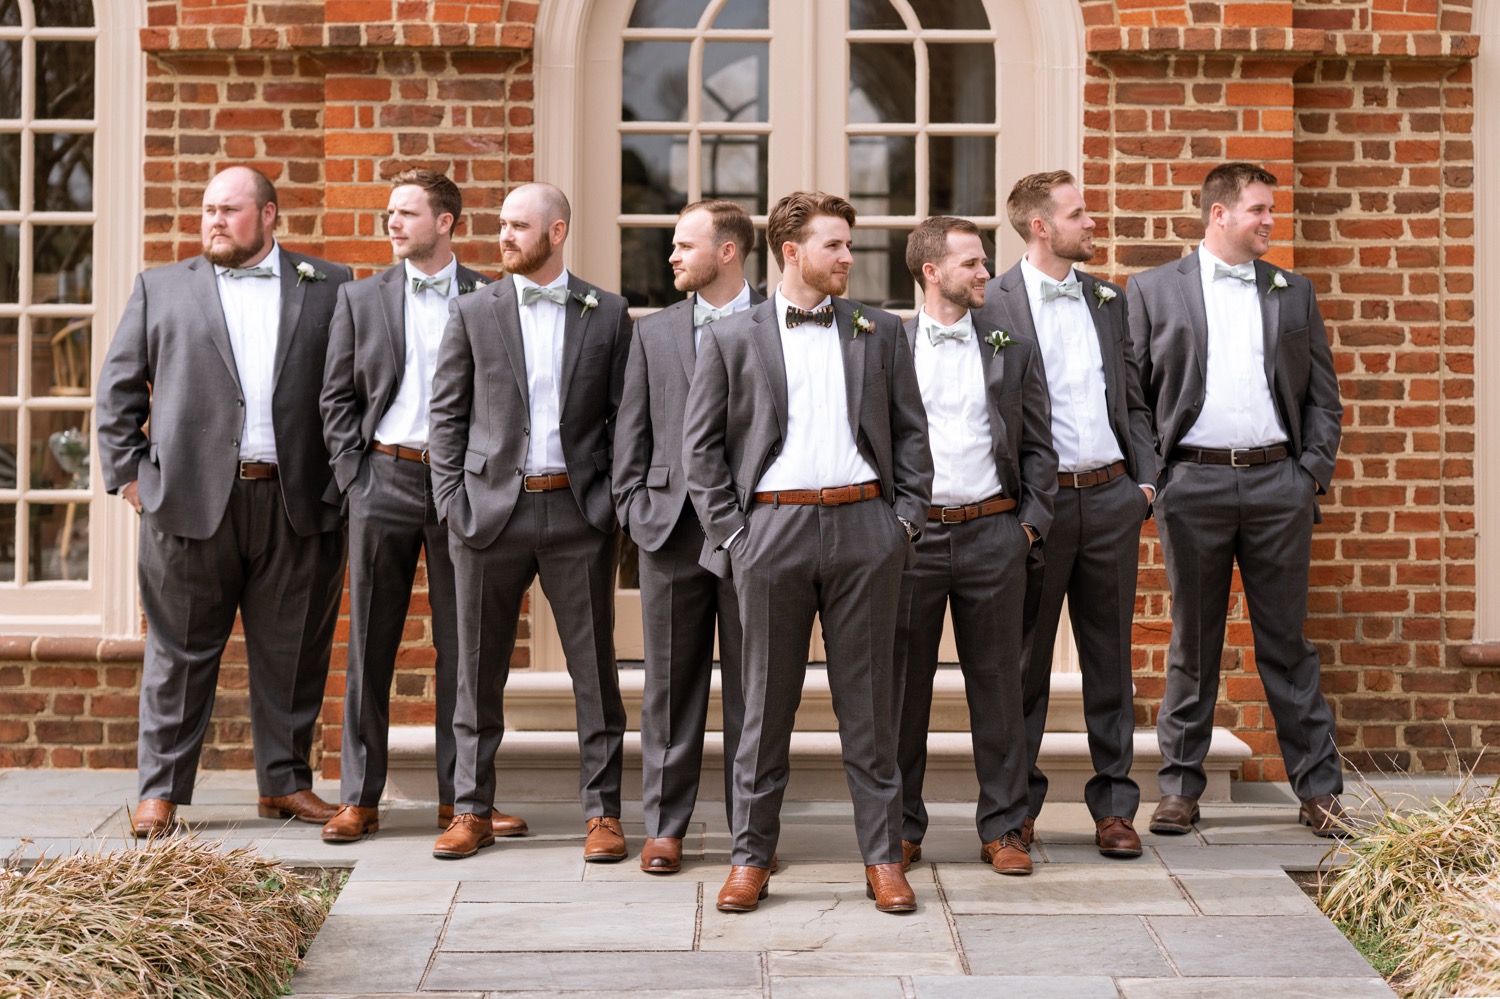 Groom and groomsmen looking dapper before the wedding at the Estate at River Run